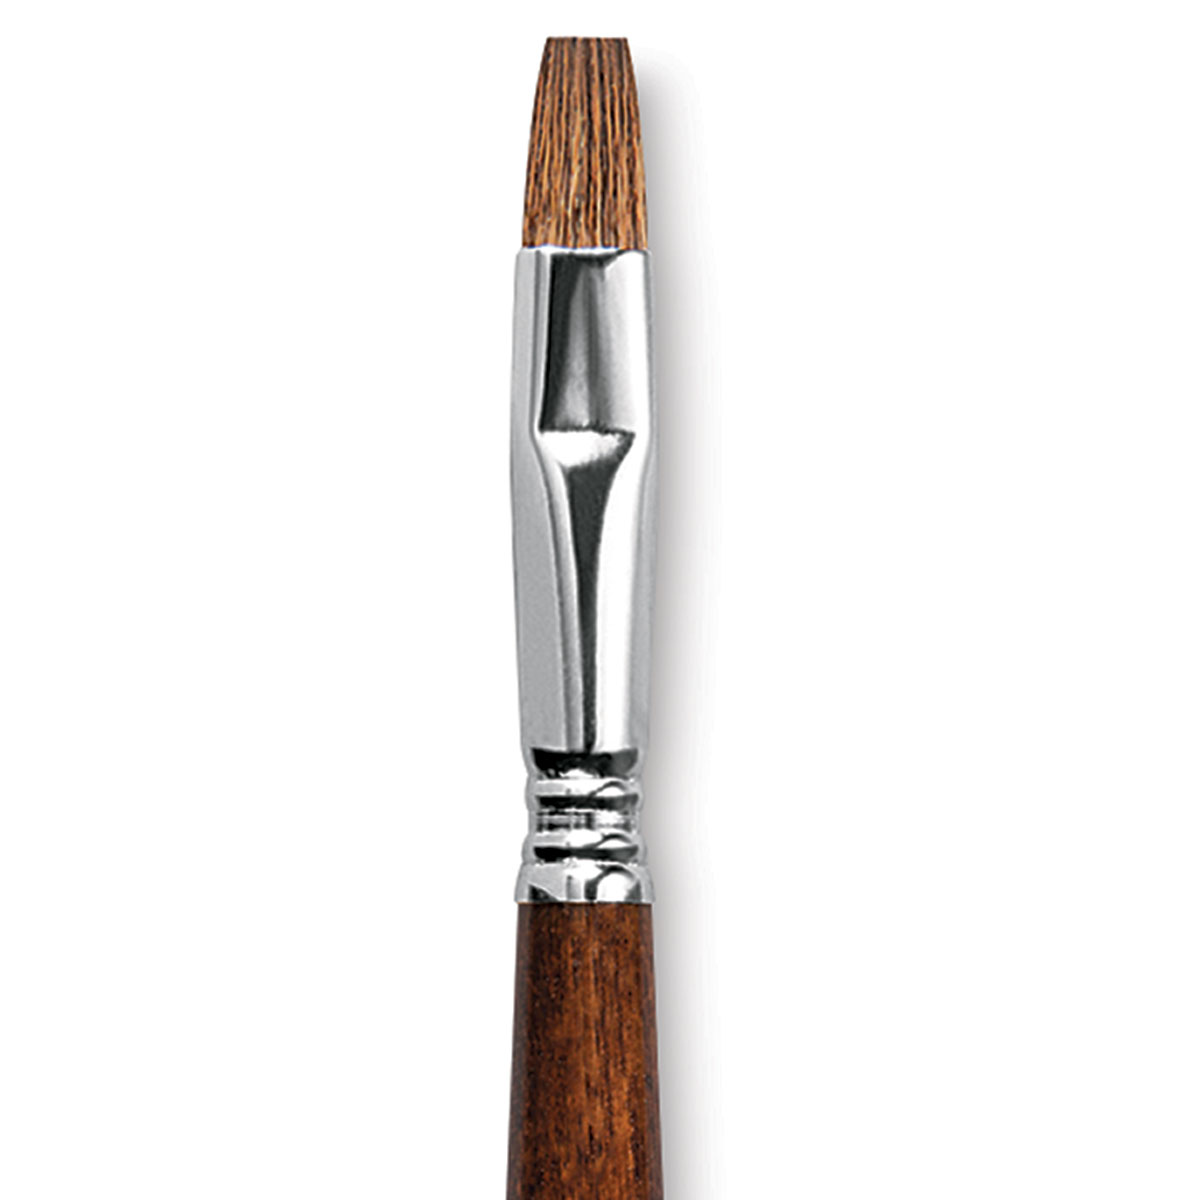 Escoda Versatil Series Artist Watercolor and Acrylic Paint Brush Size 22 Speedball Art Products 1540-22 Pointed Round Short Handle 